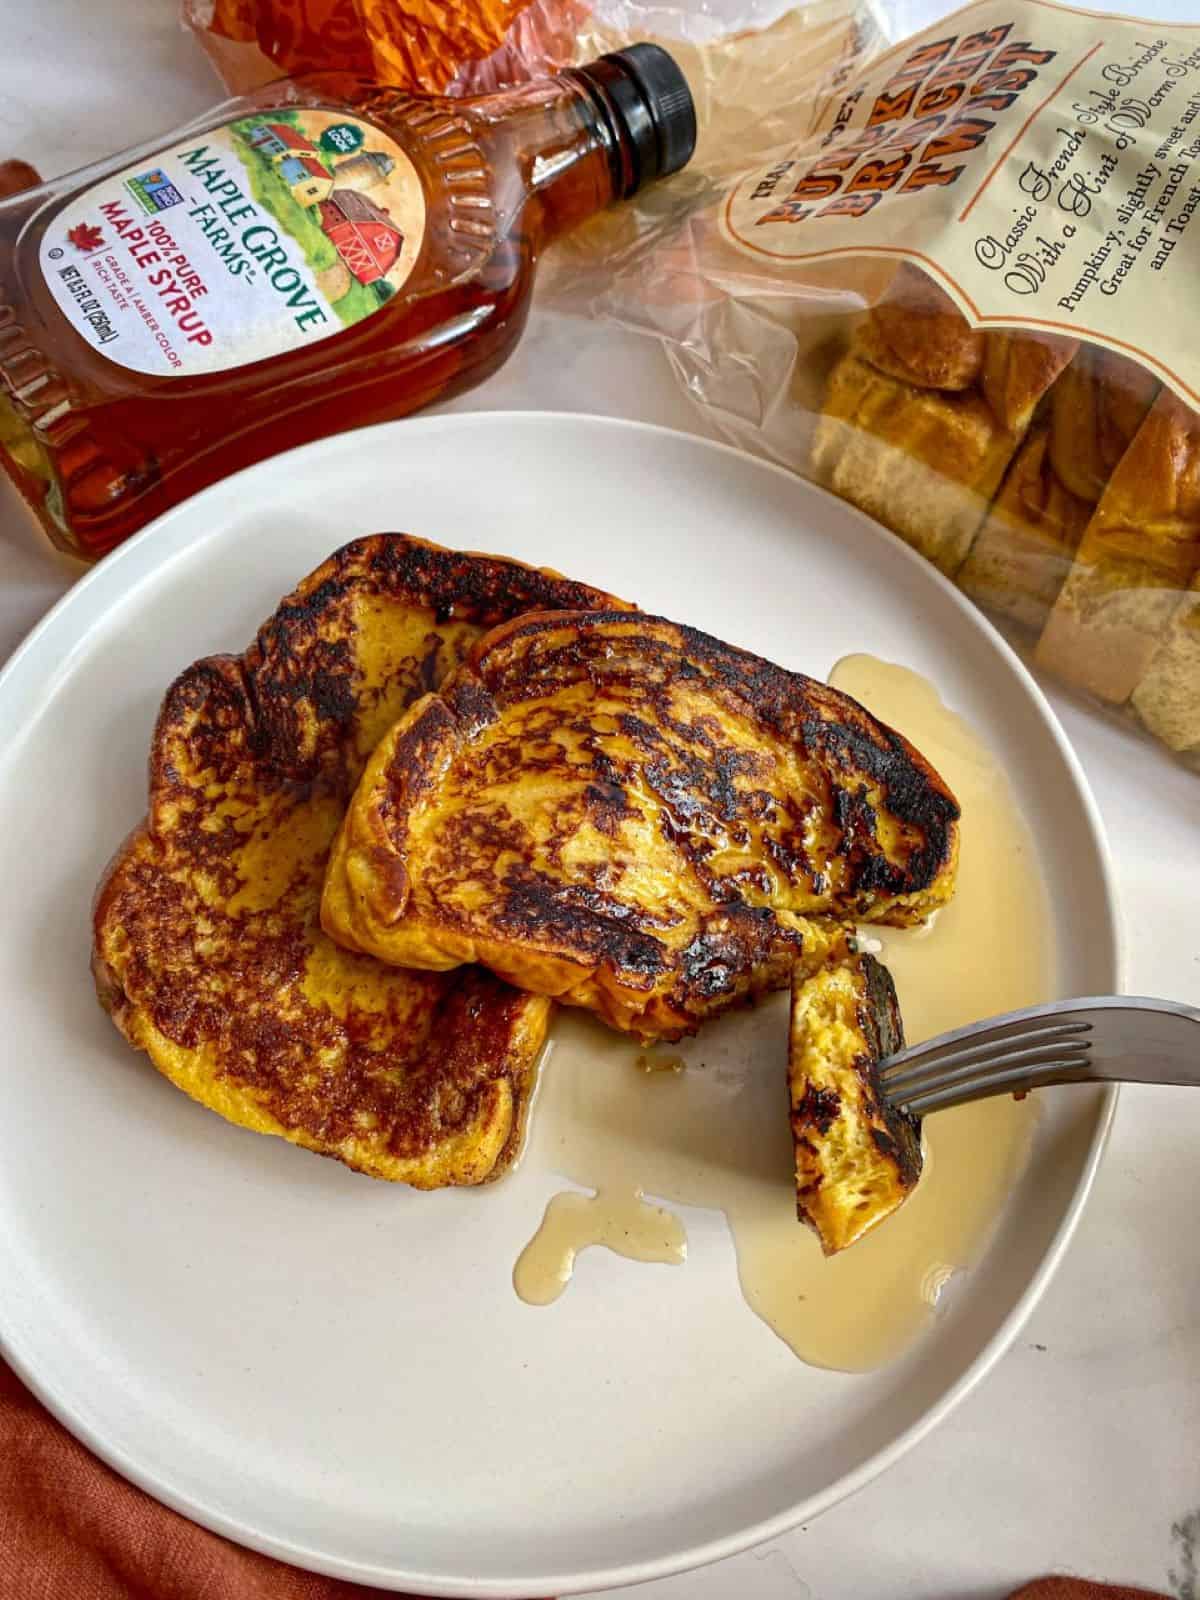 Two slices of brioche French toast are on a white plate with a fork cutting into one of the slices showing the soft inside. A glass bottle of maple syrup and a loaf of bread are next to the plate.